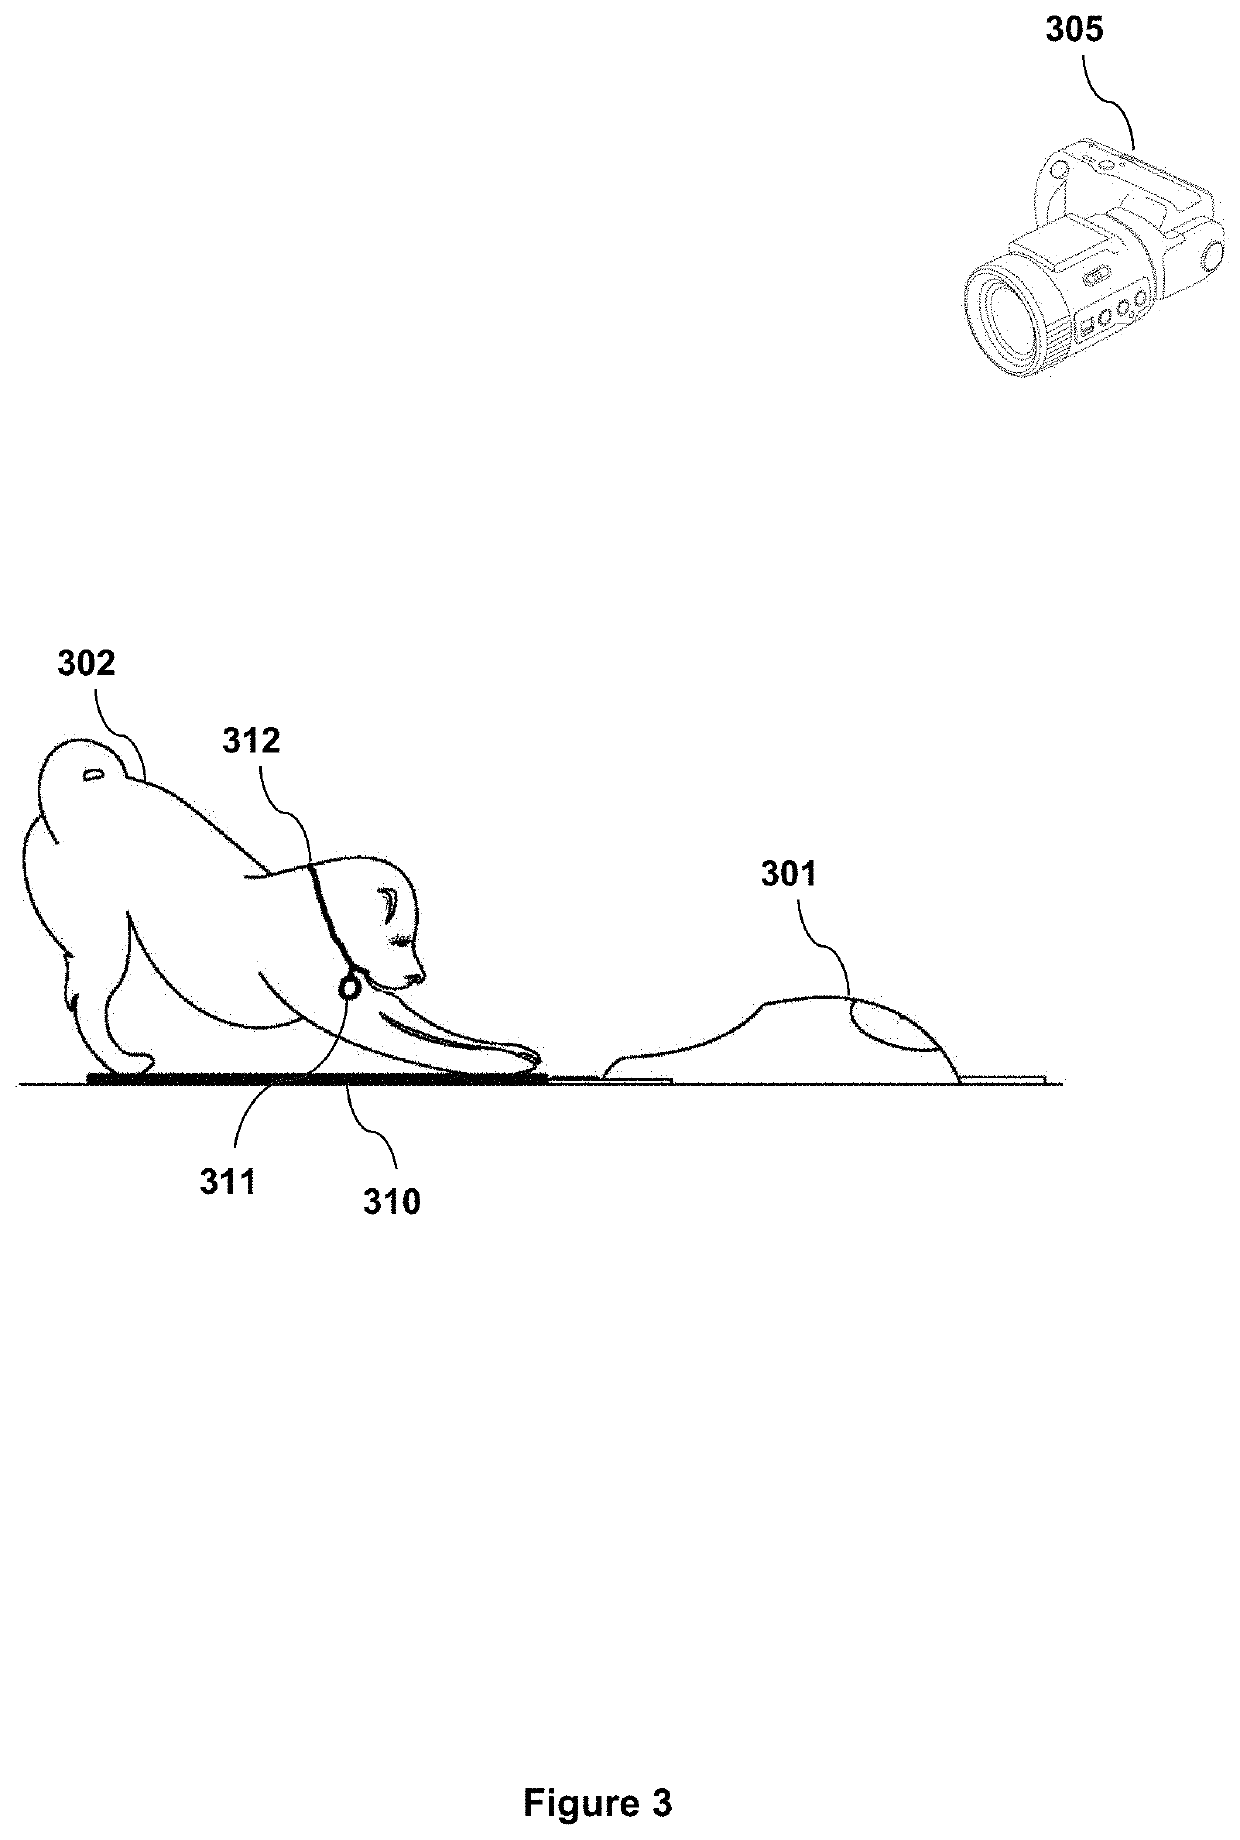 Animal interaction devices, systems and methods